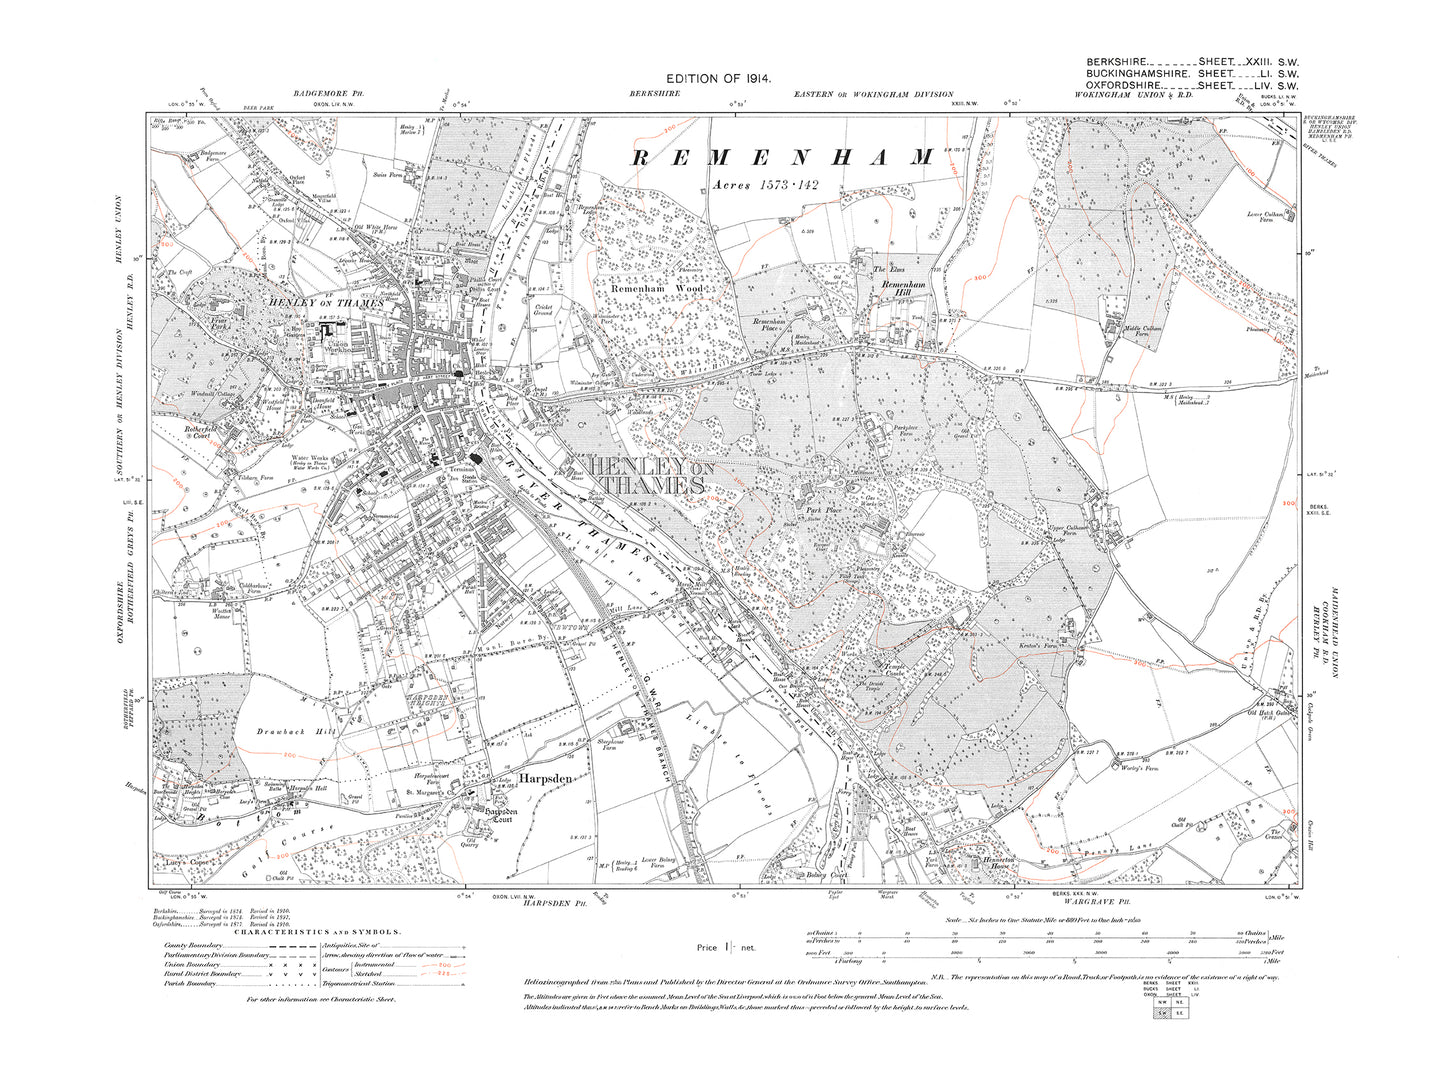 A 1914 map showing Remenham Hill, plus Henley on Thames, Oxen) in Berkshire - OS 1:10560 scale map, Berks 23SW